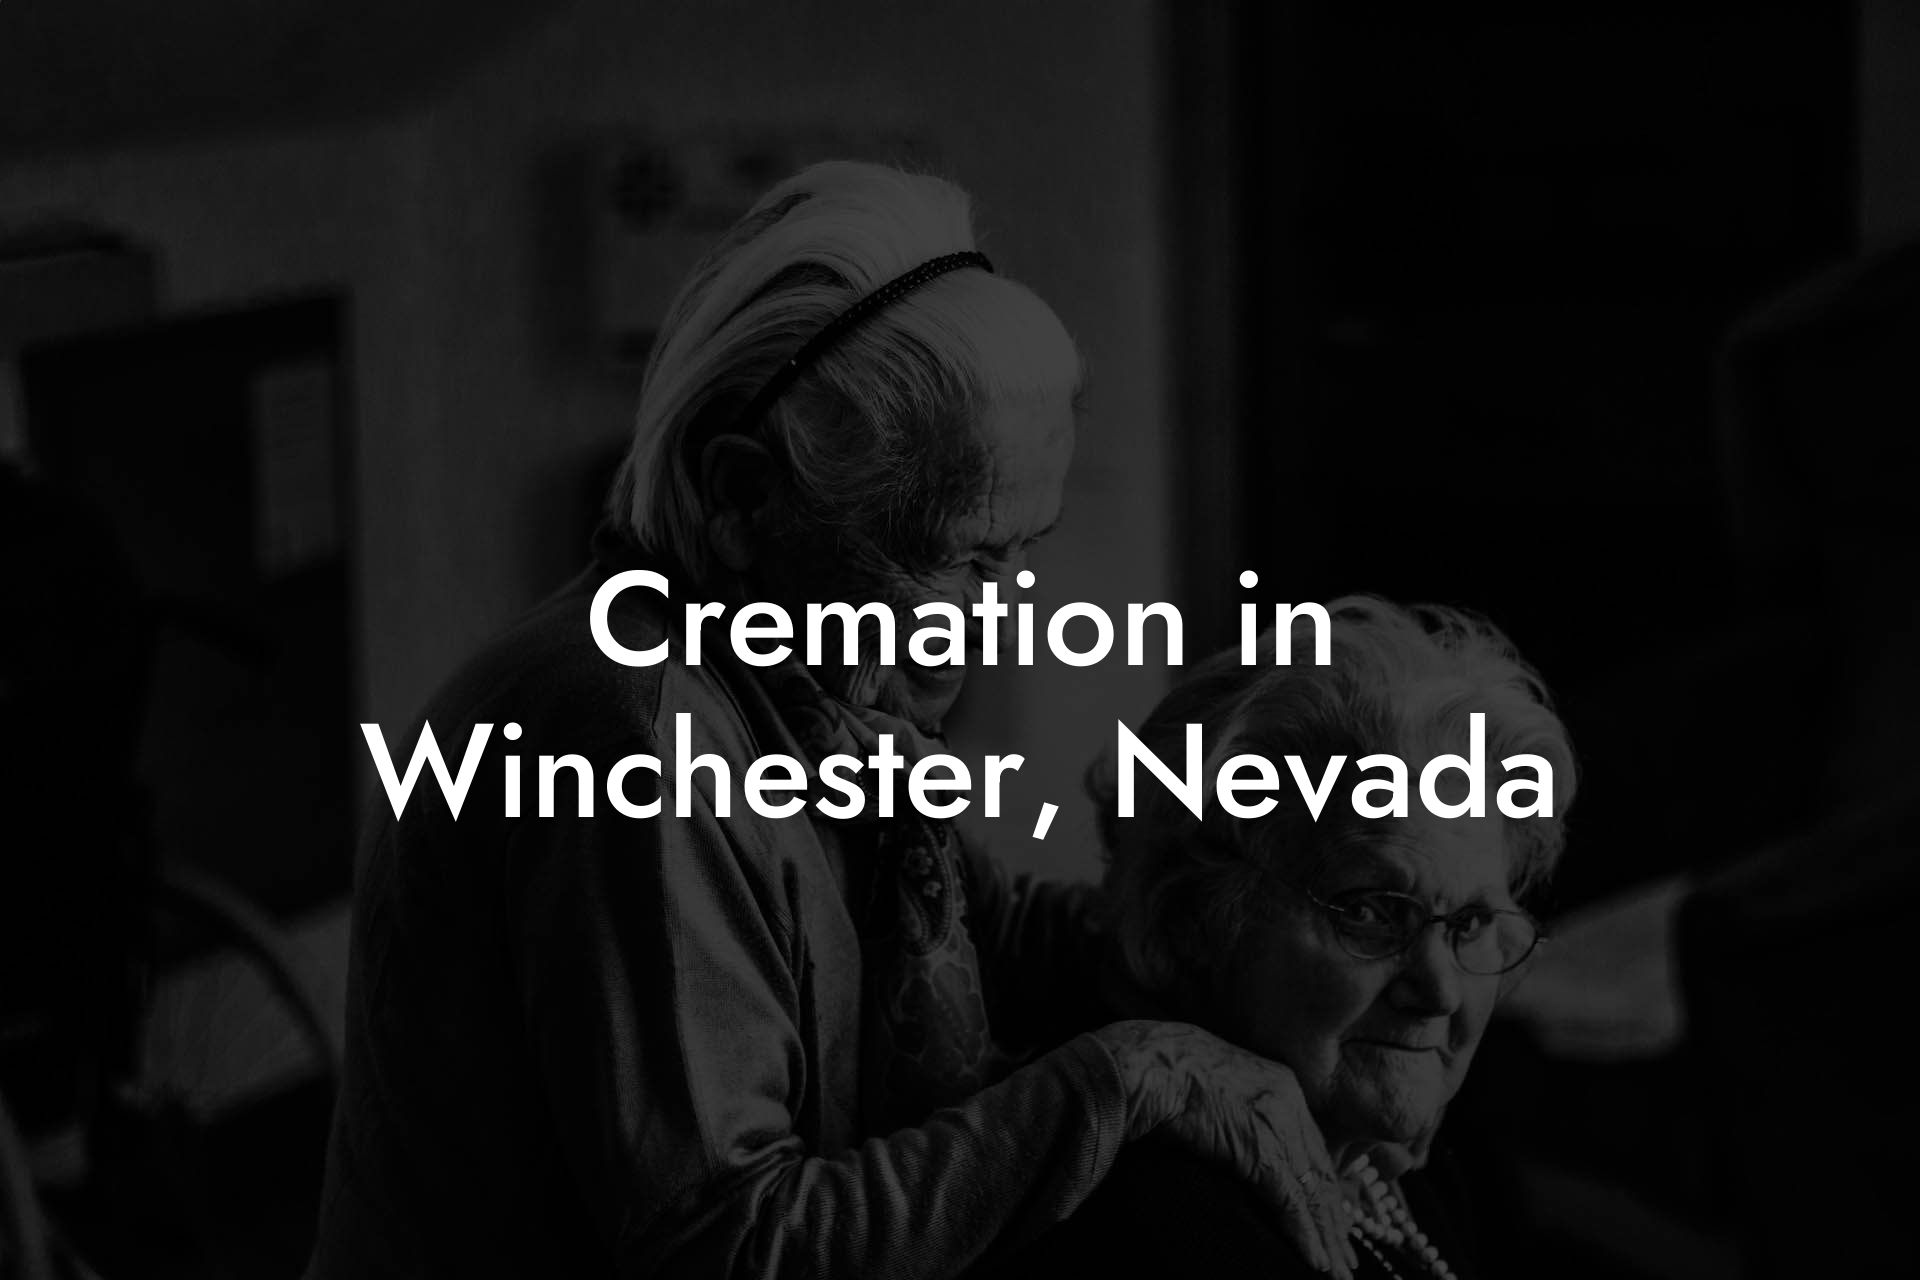 Cremation in Winchester, Nevada